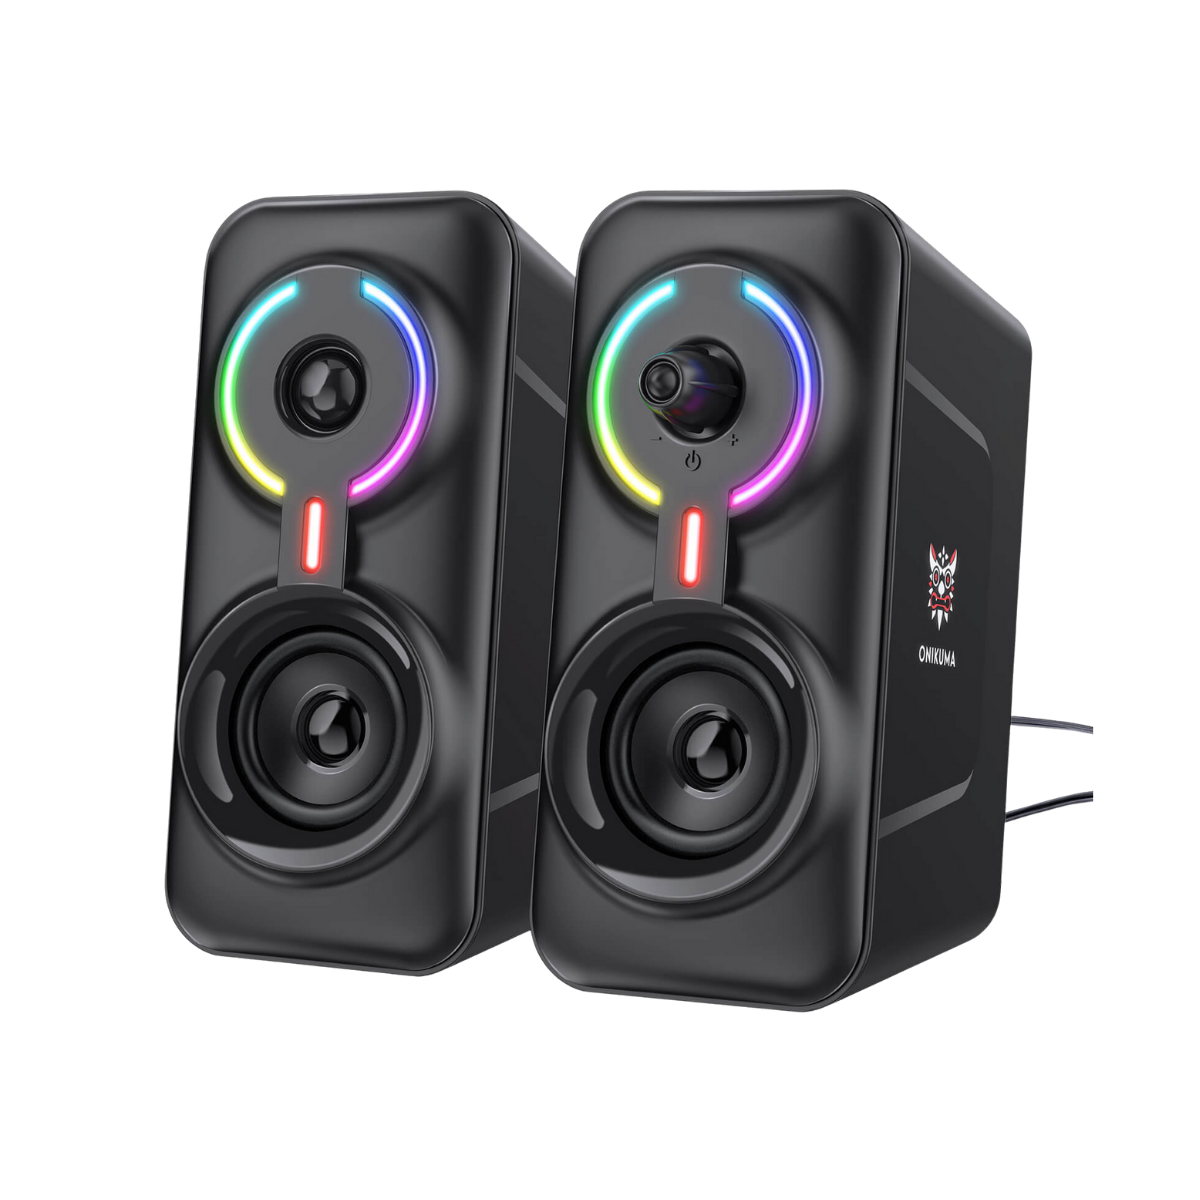 ONIKUMA L6 Gaming Speaker 5W*2 Multimedia Speaker with BT5.0 and AUX Mode HIFI Sound Quality RGB Light for PC Phone